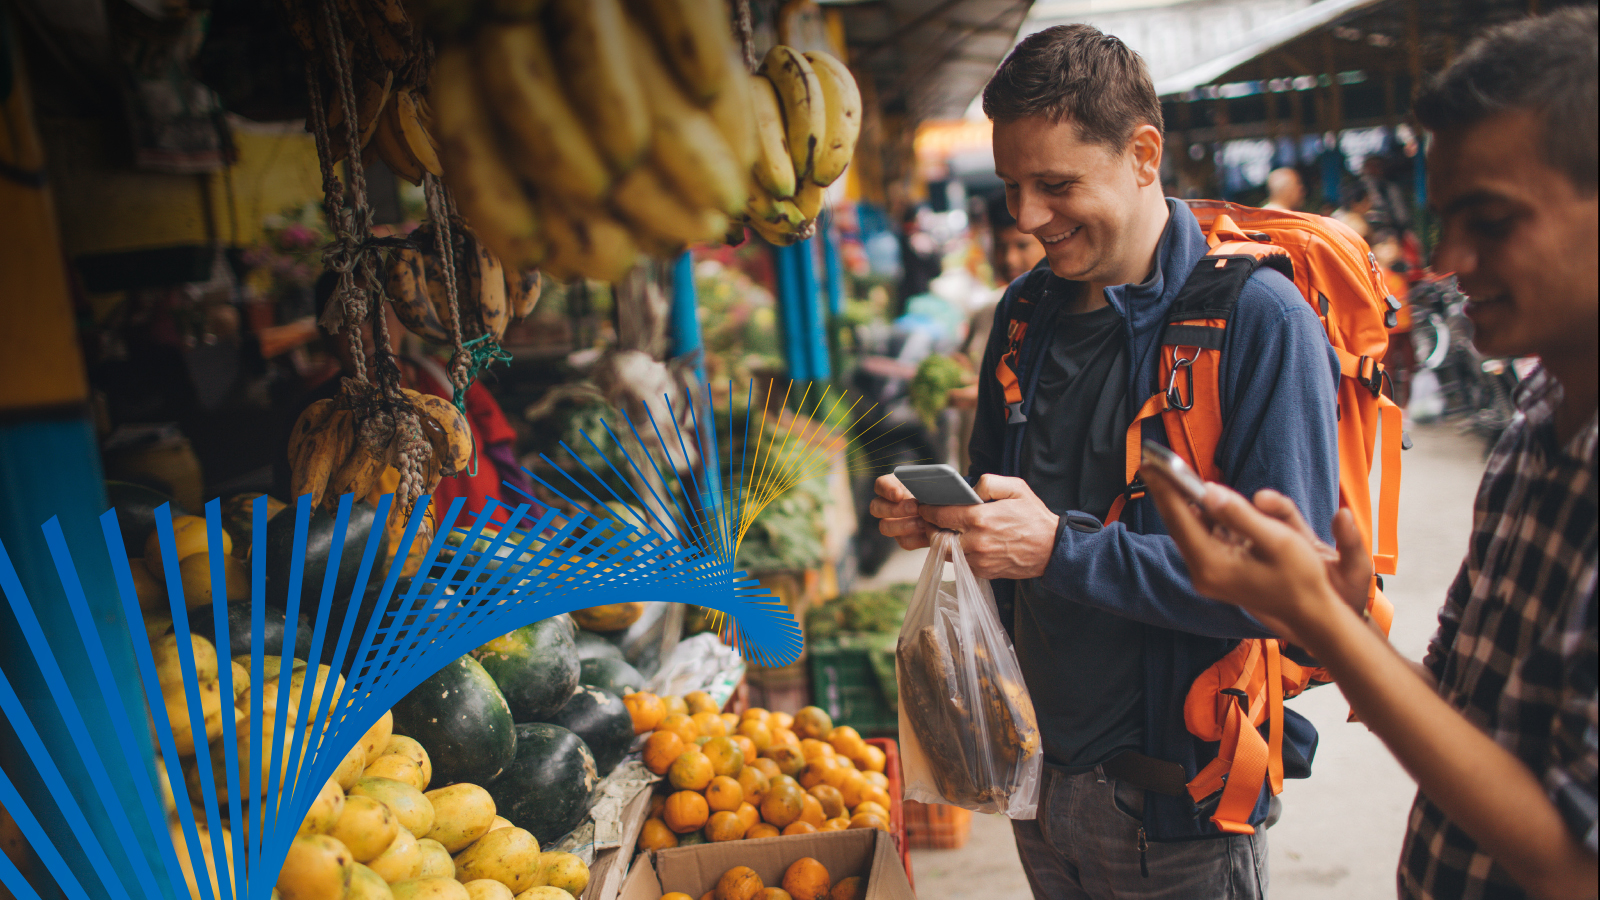 Man buying fruit using his mobile phone at an outdoor market.